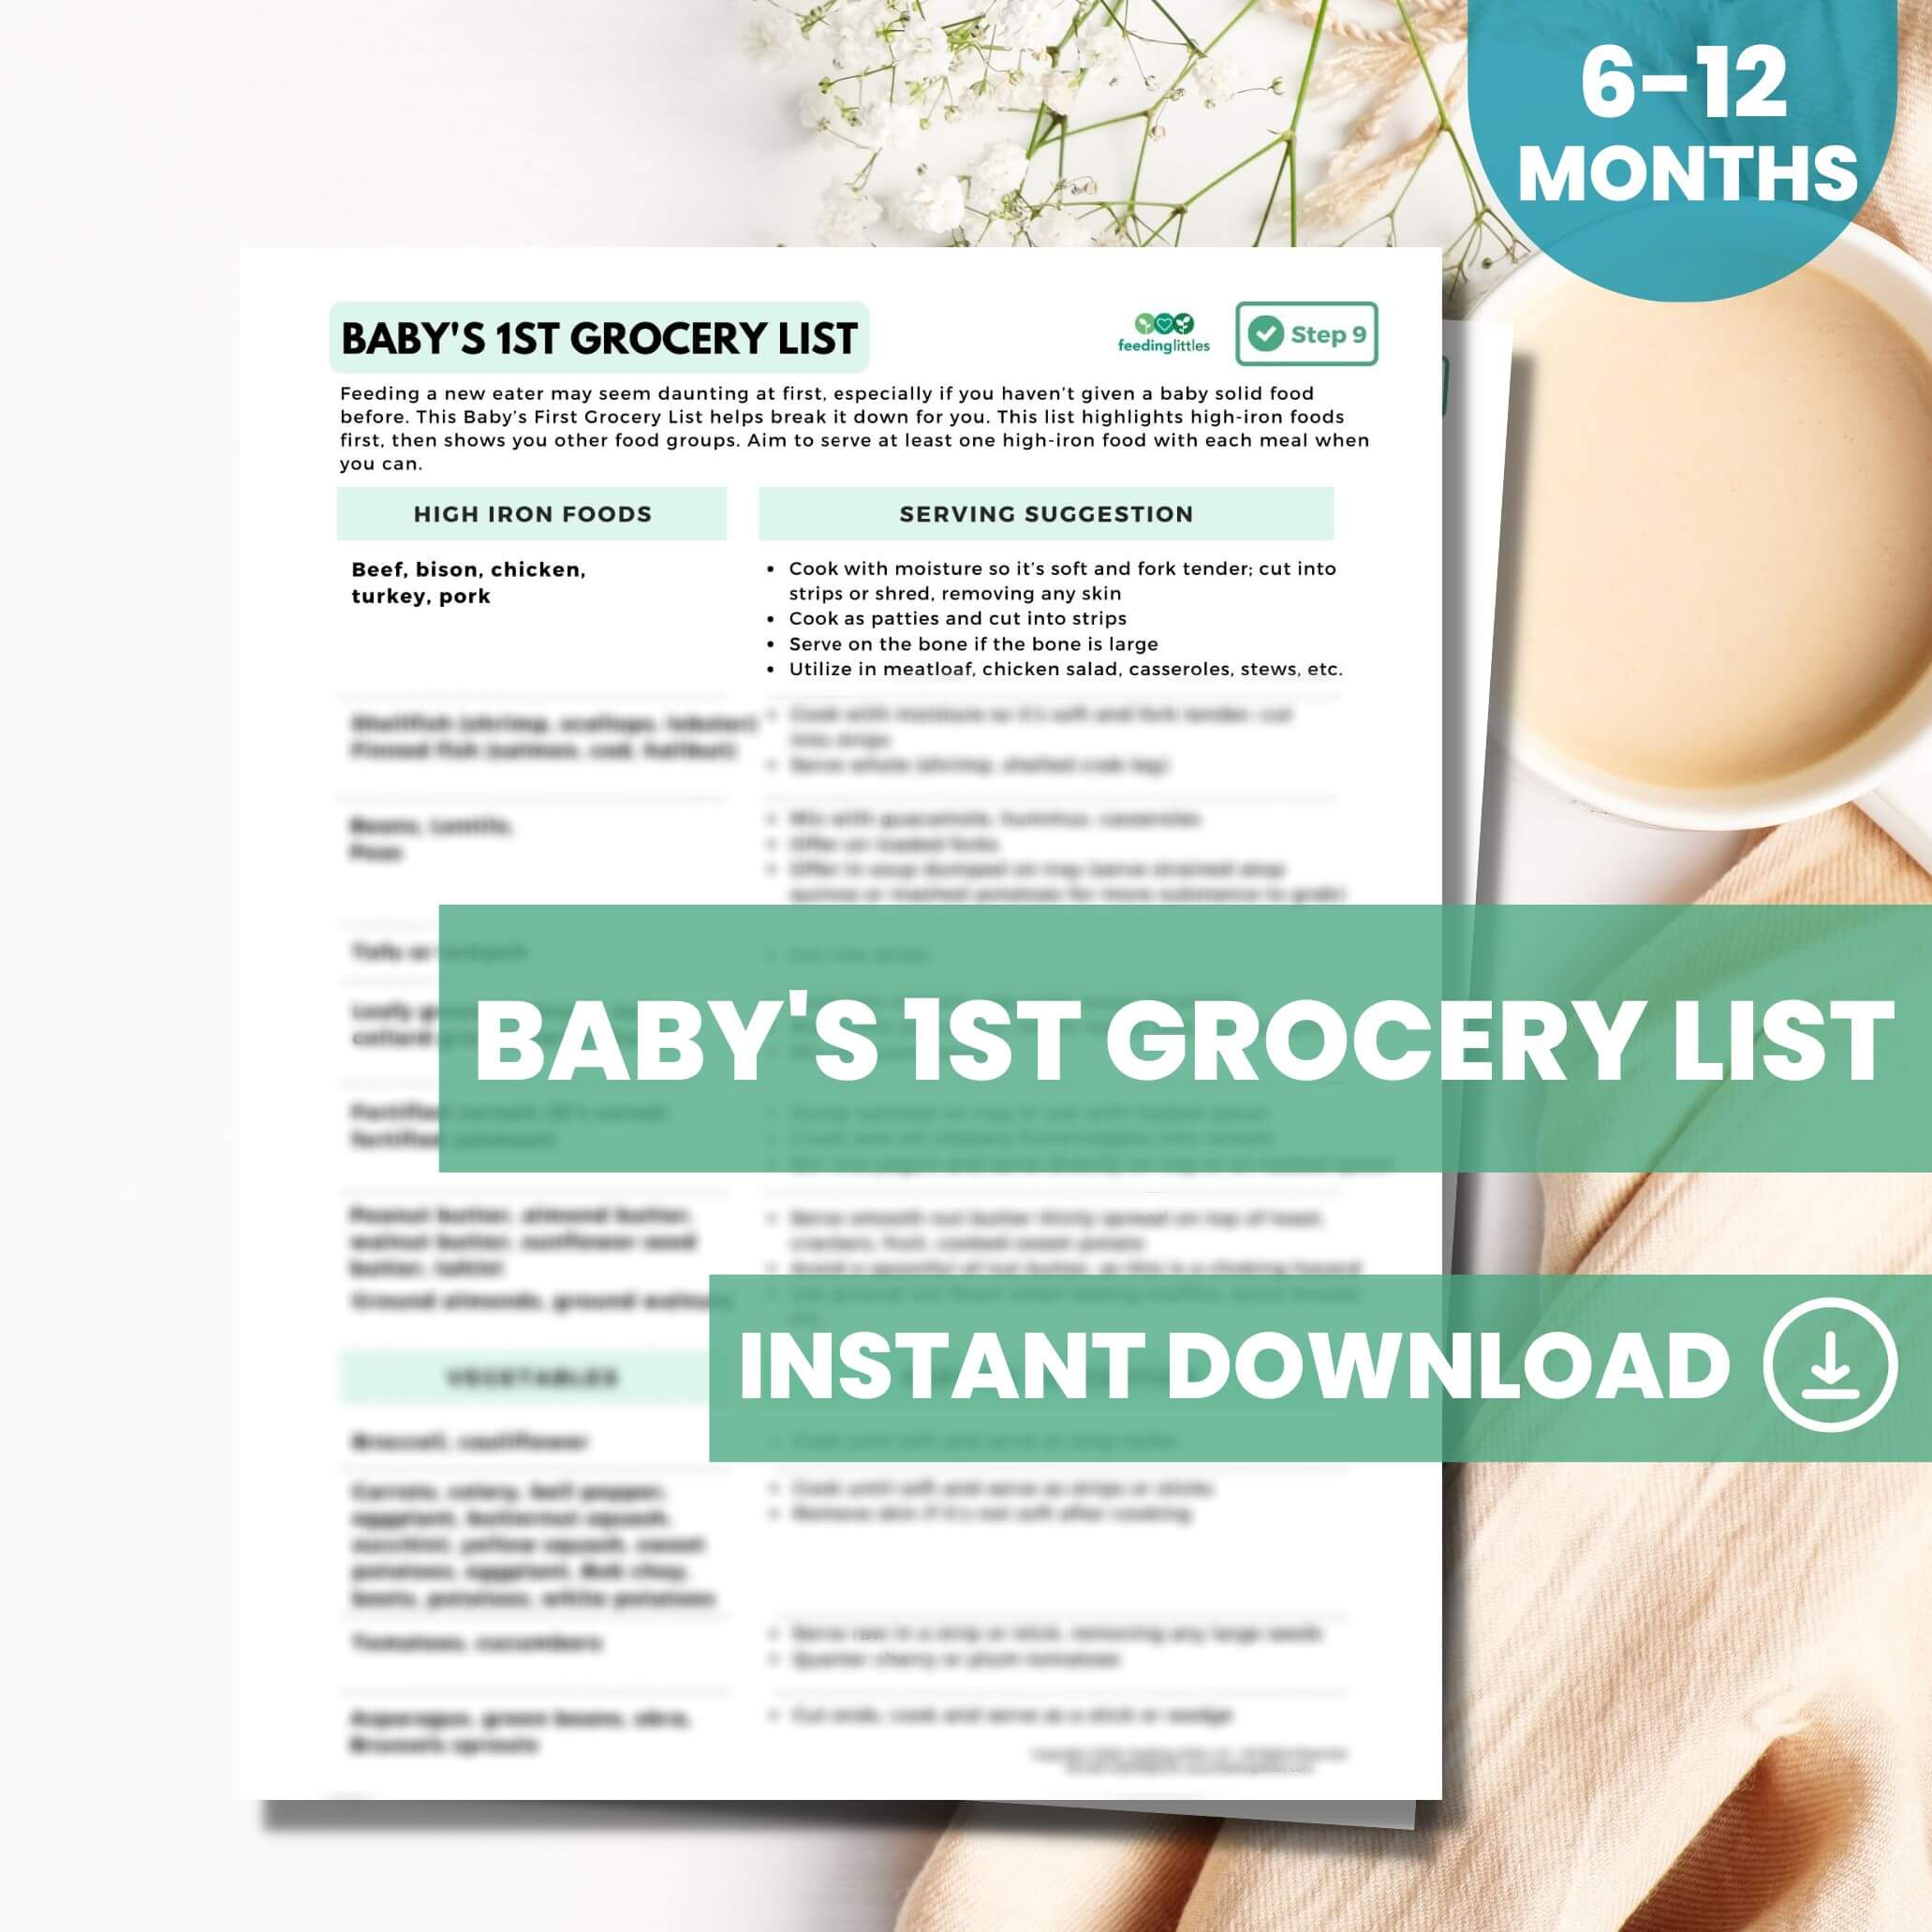 Baby's 1st Grocery List